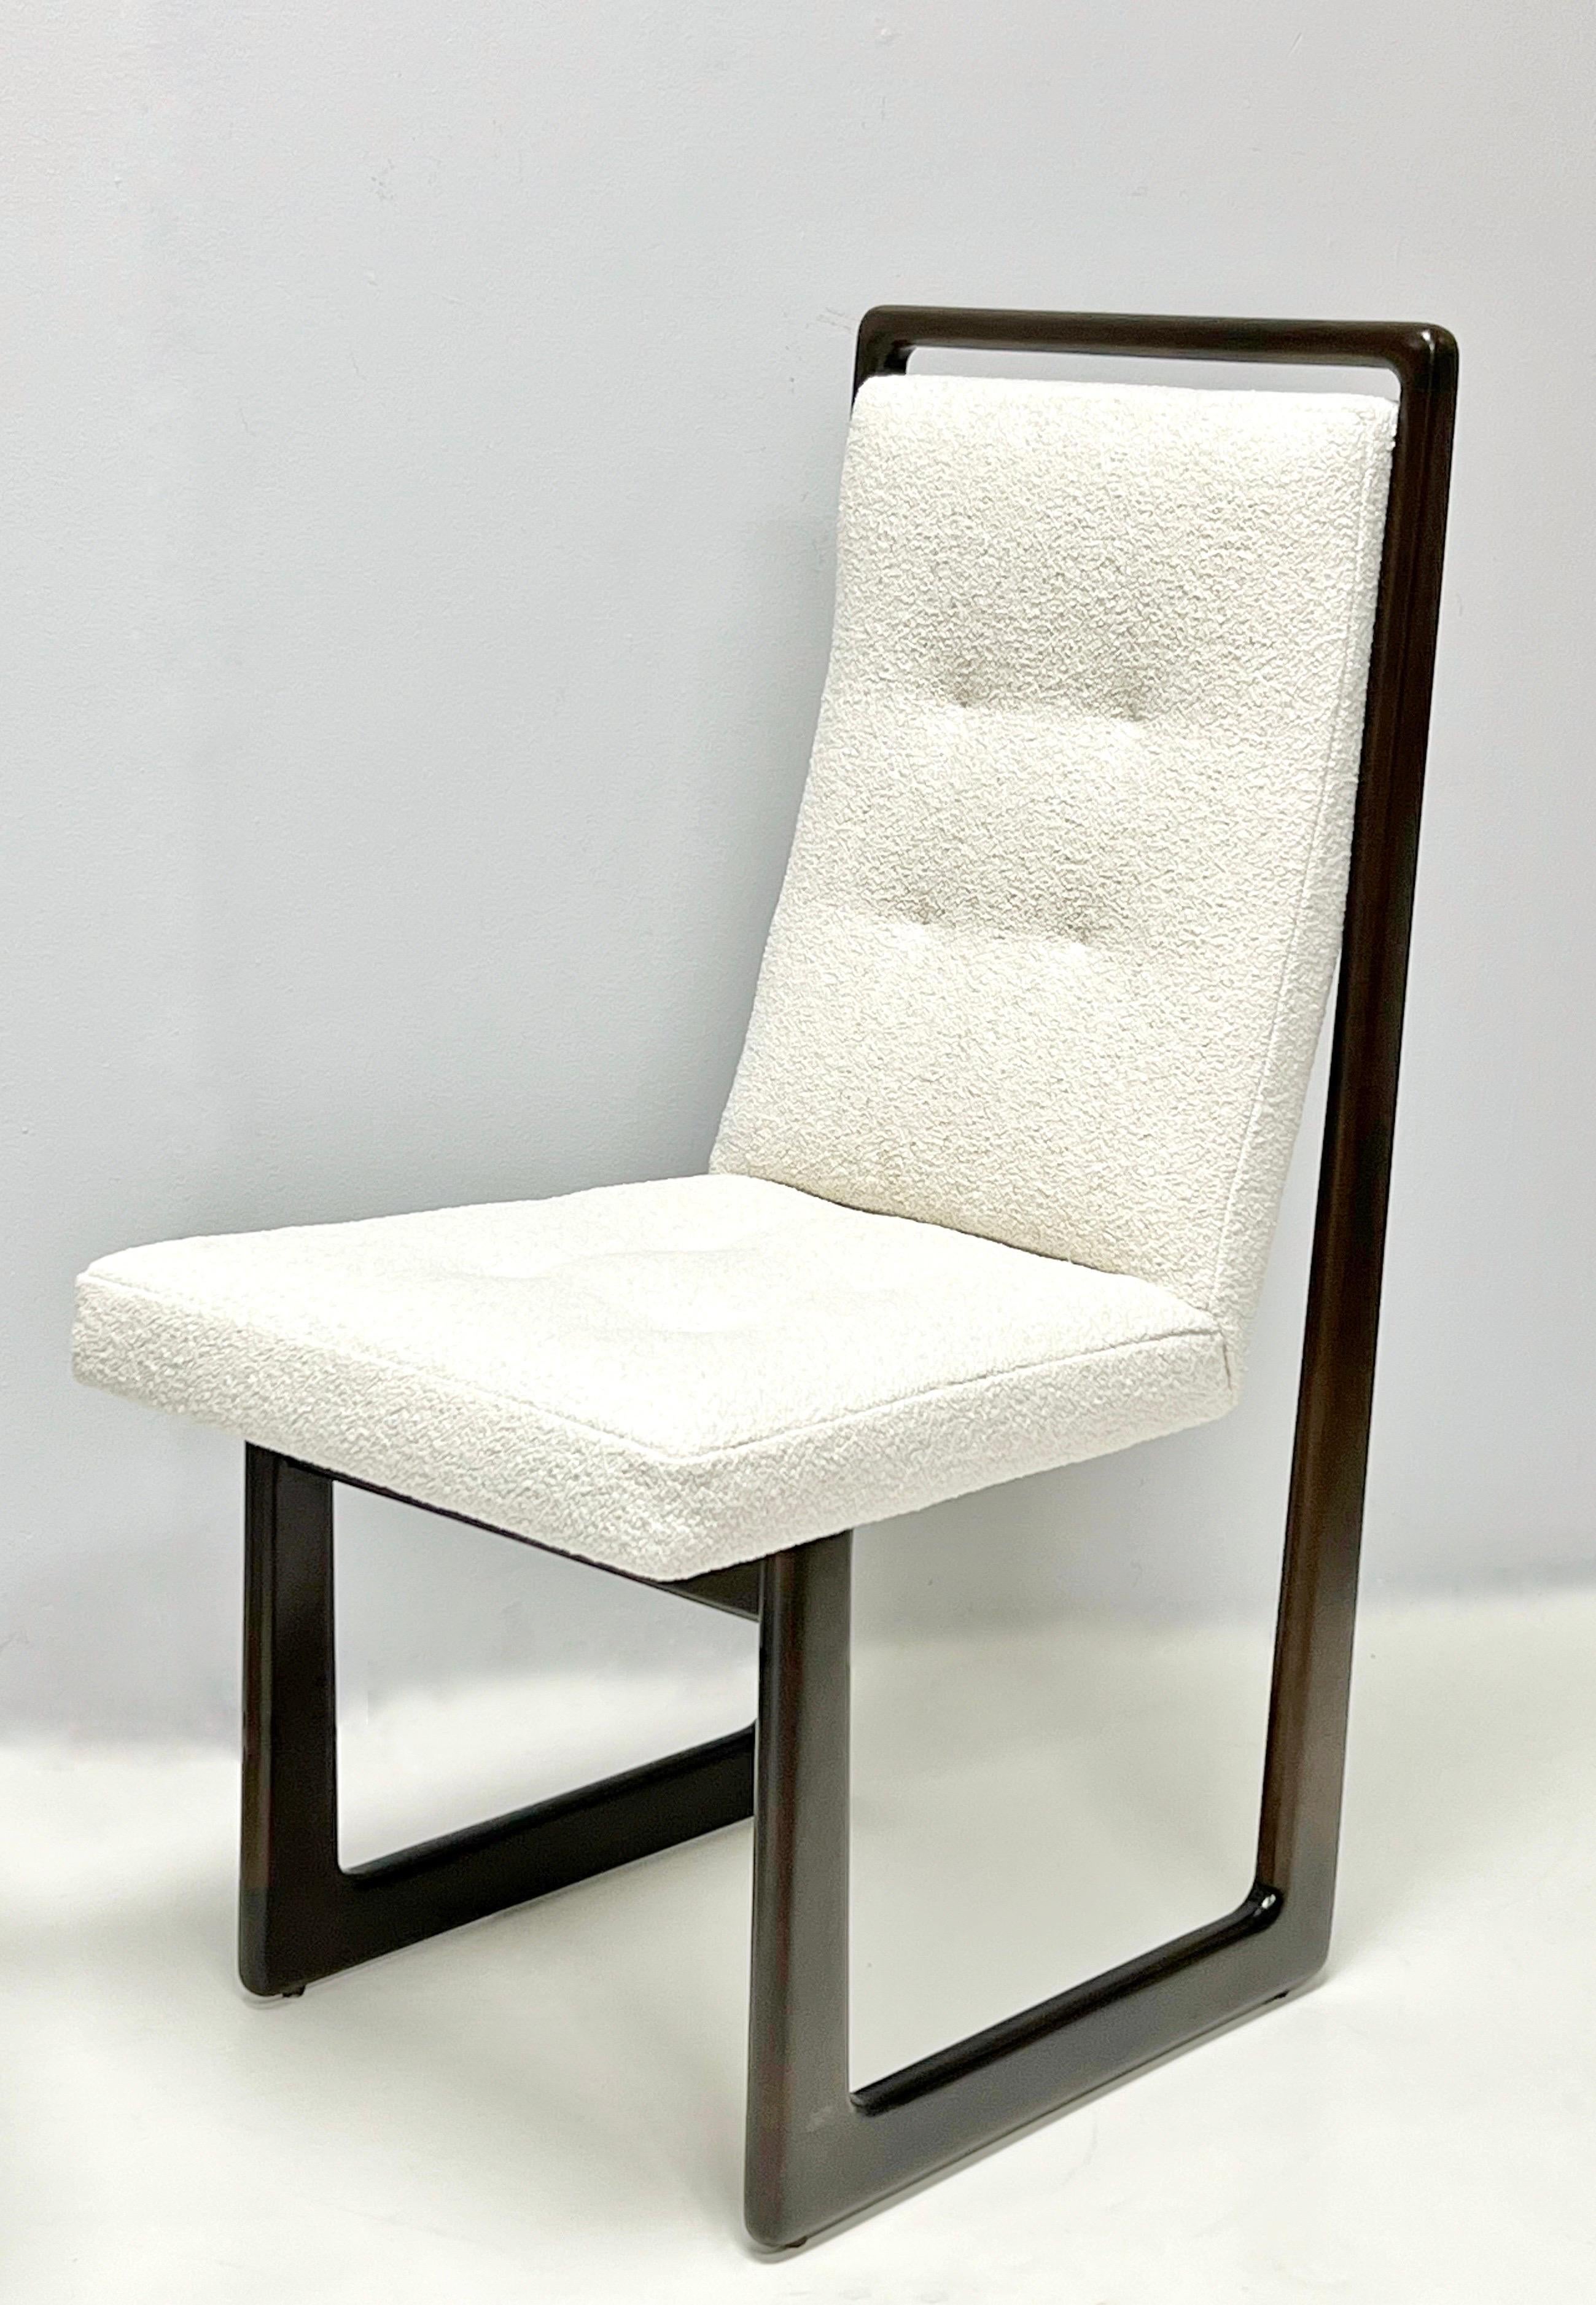 Vladimir Kagan 6 Sculptural Cubist Dining Chairs In Excellent Condition For Sale In Miami, FL